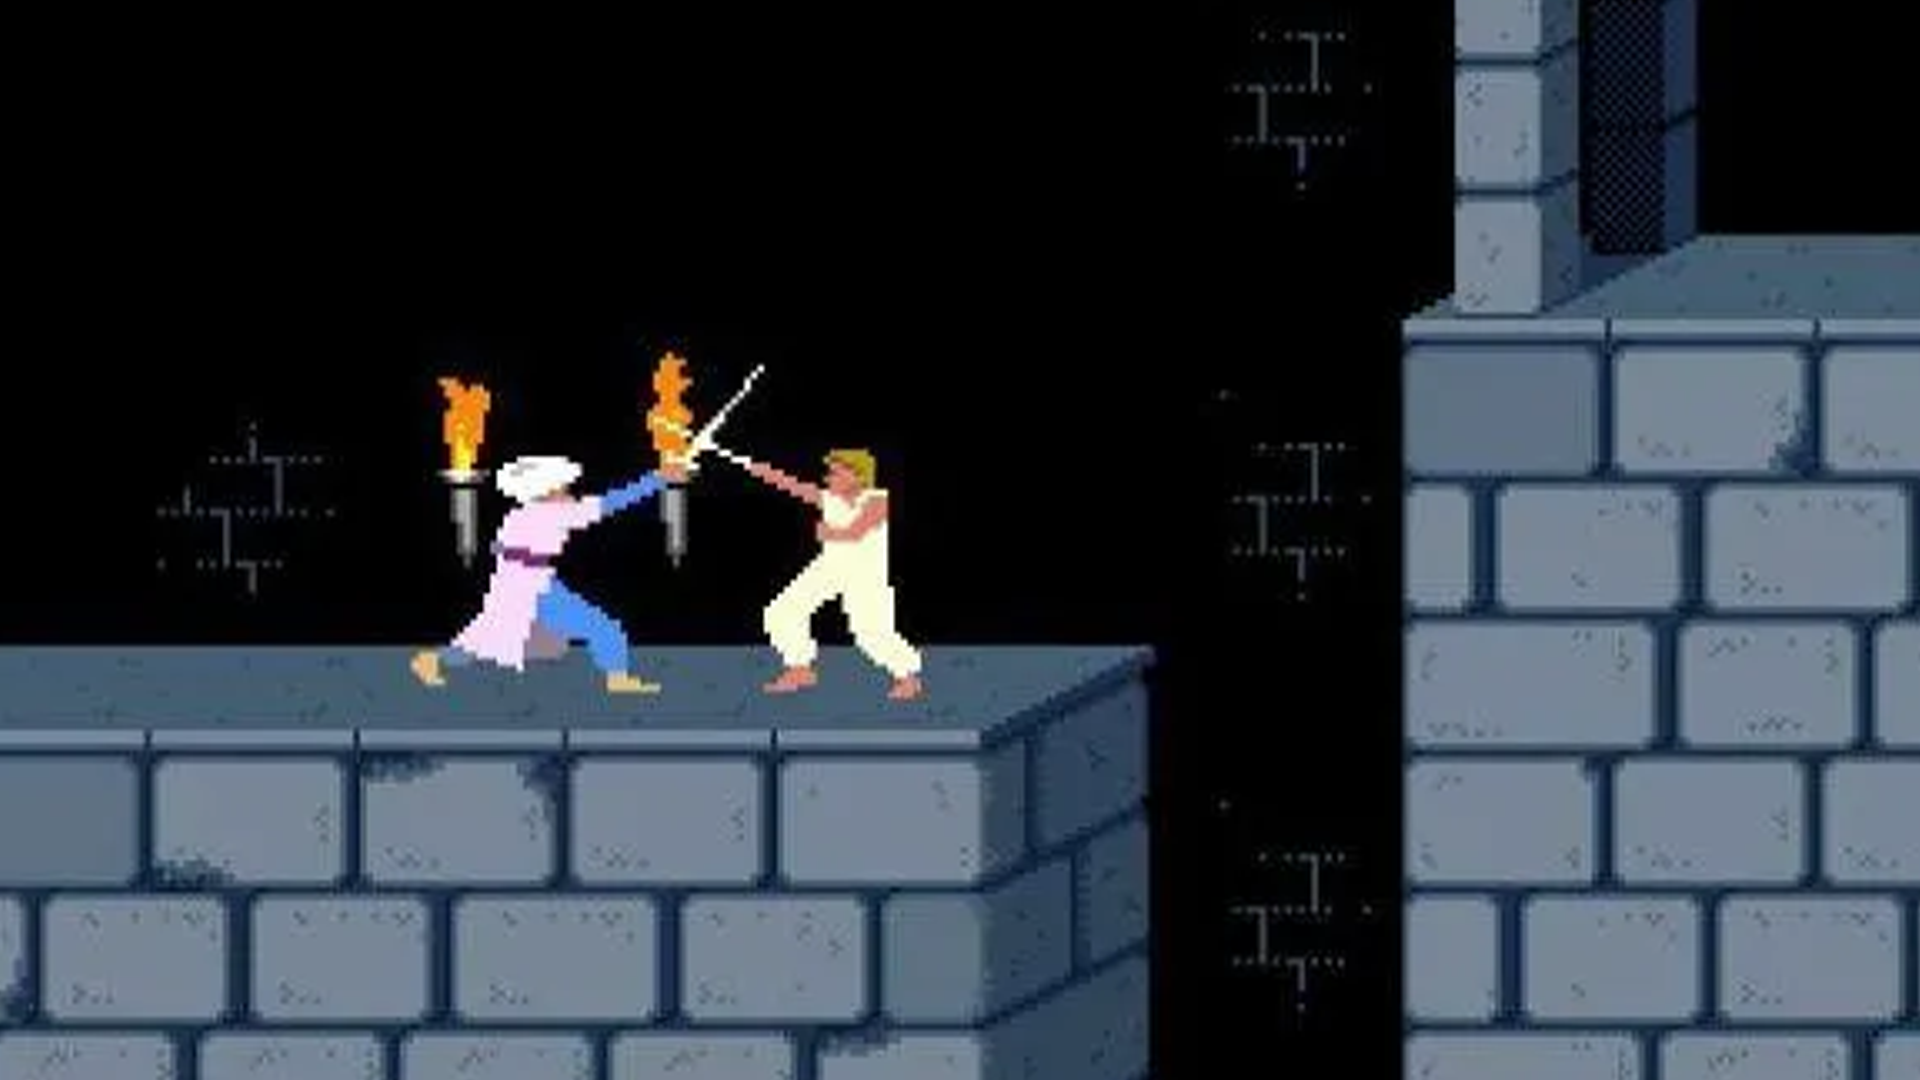 Prince of Persia Gameplay